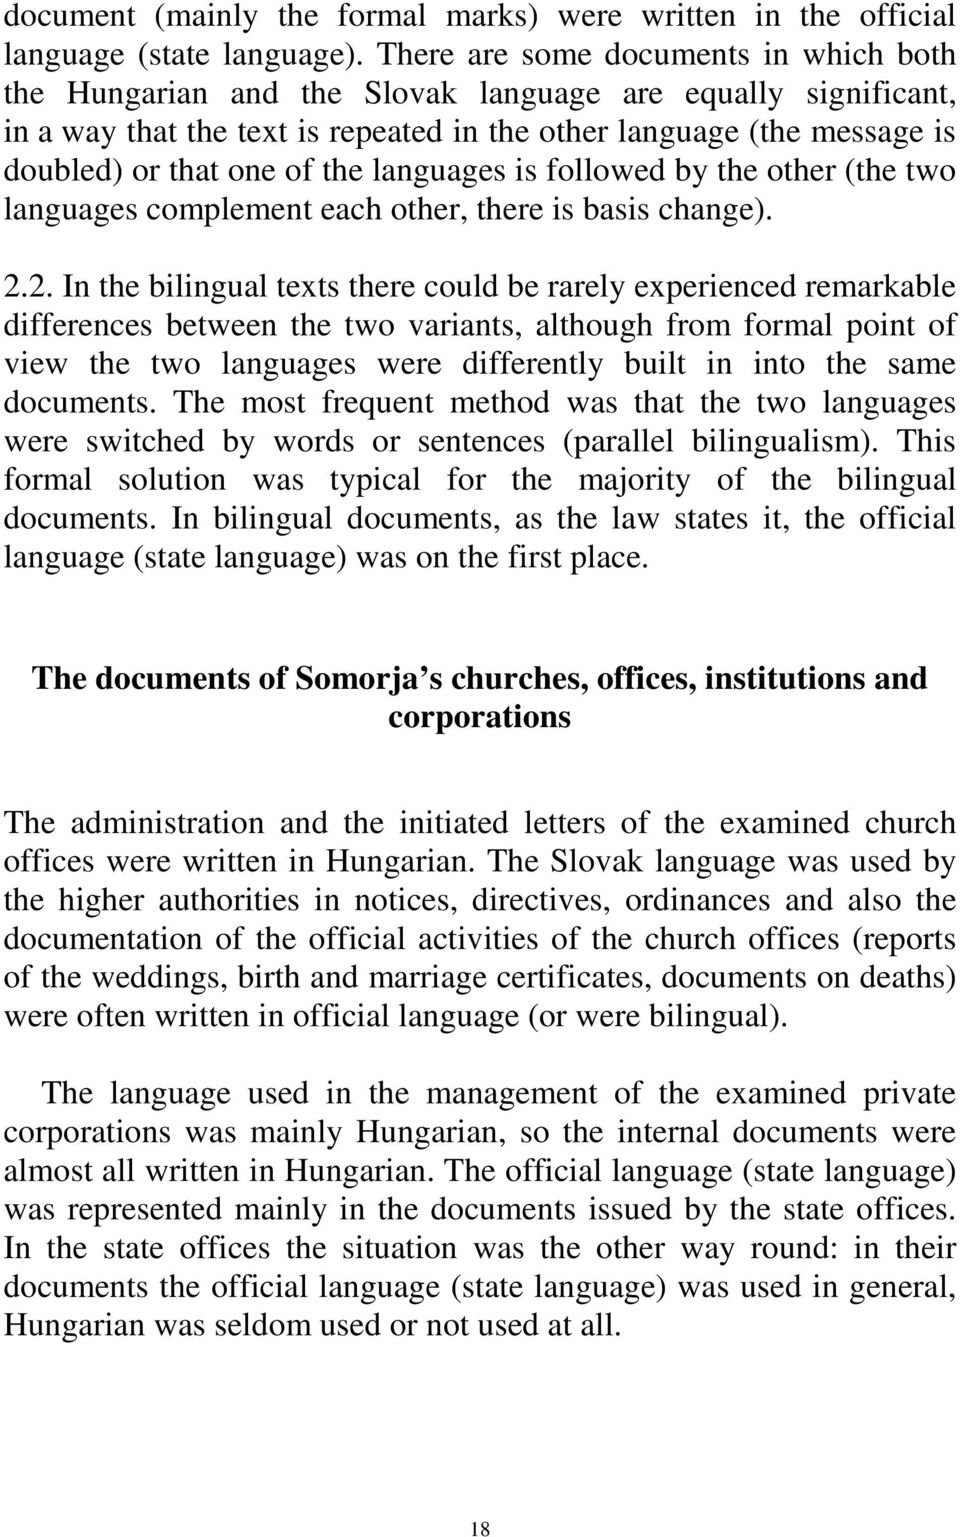 the languages is followed by the other (the two languages complement each other, there is basis change). 2.